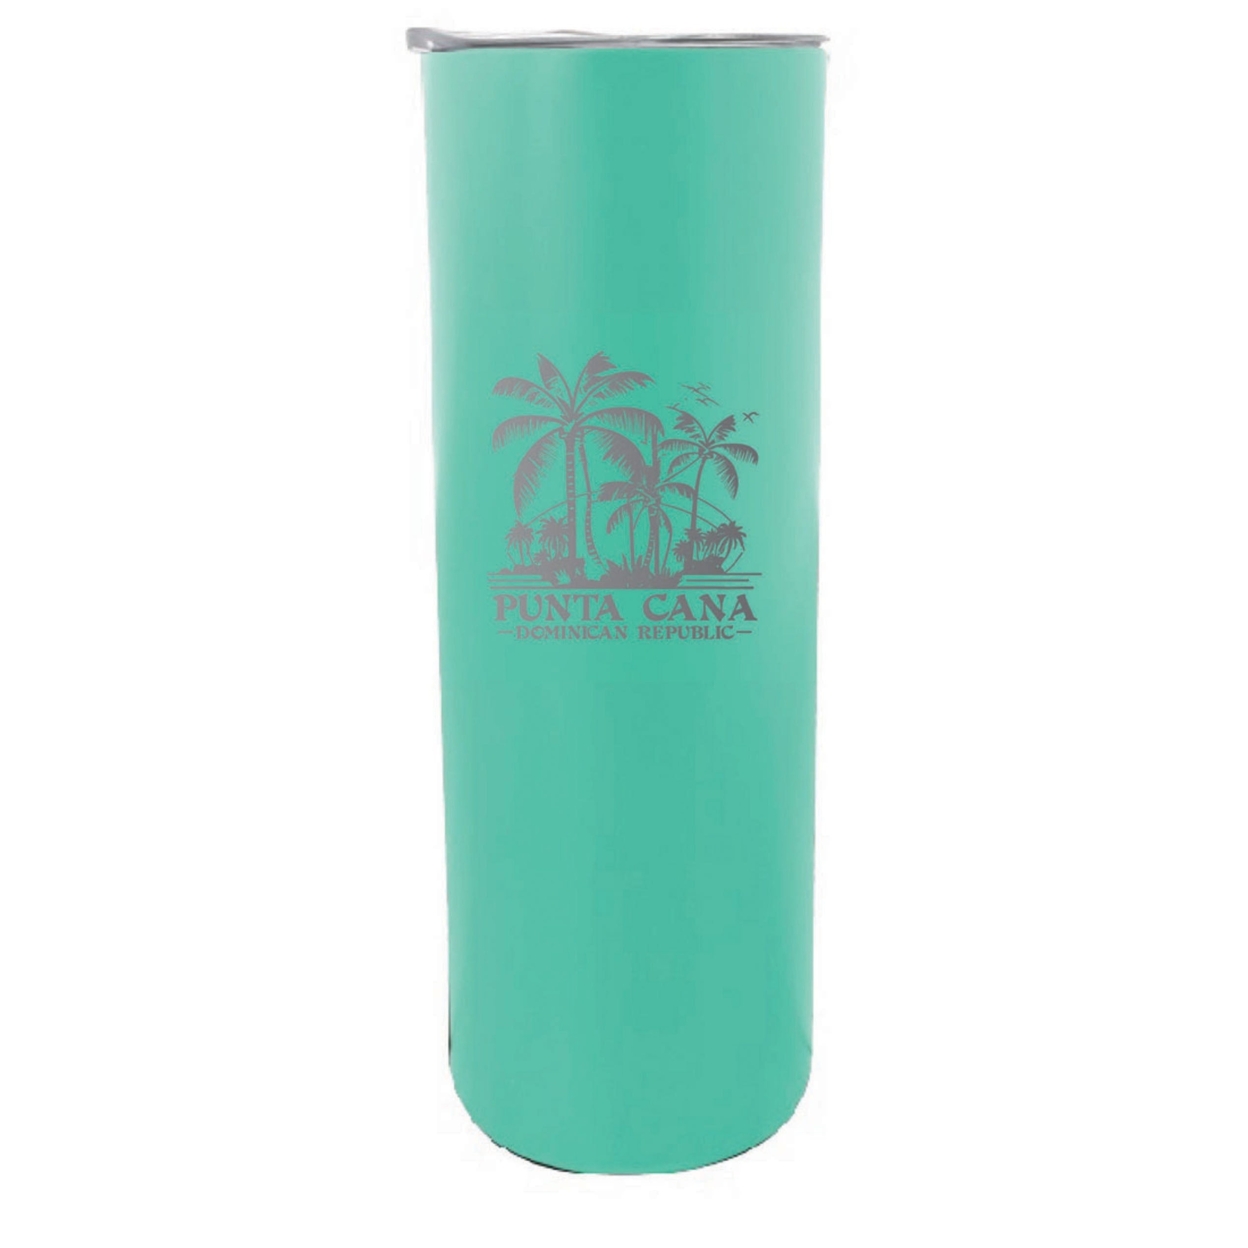 Punta Cana Dominican Republic Souvenir 20 Oz Insulated Stainless Steel Skinny Tumbler Etched - Rainbow Glitter Gray, PALMS